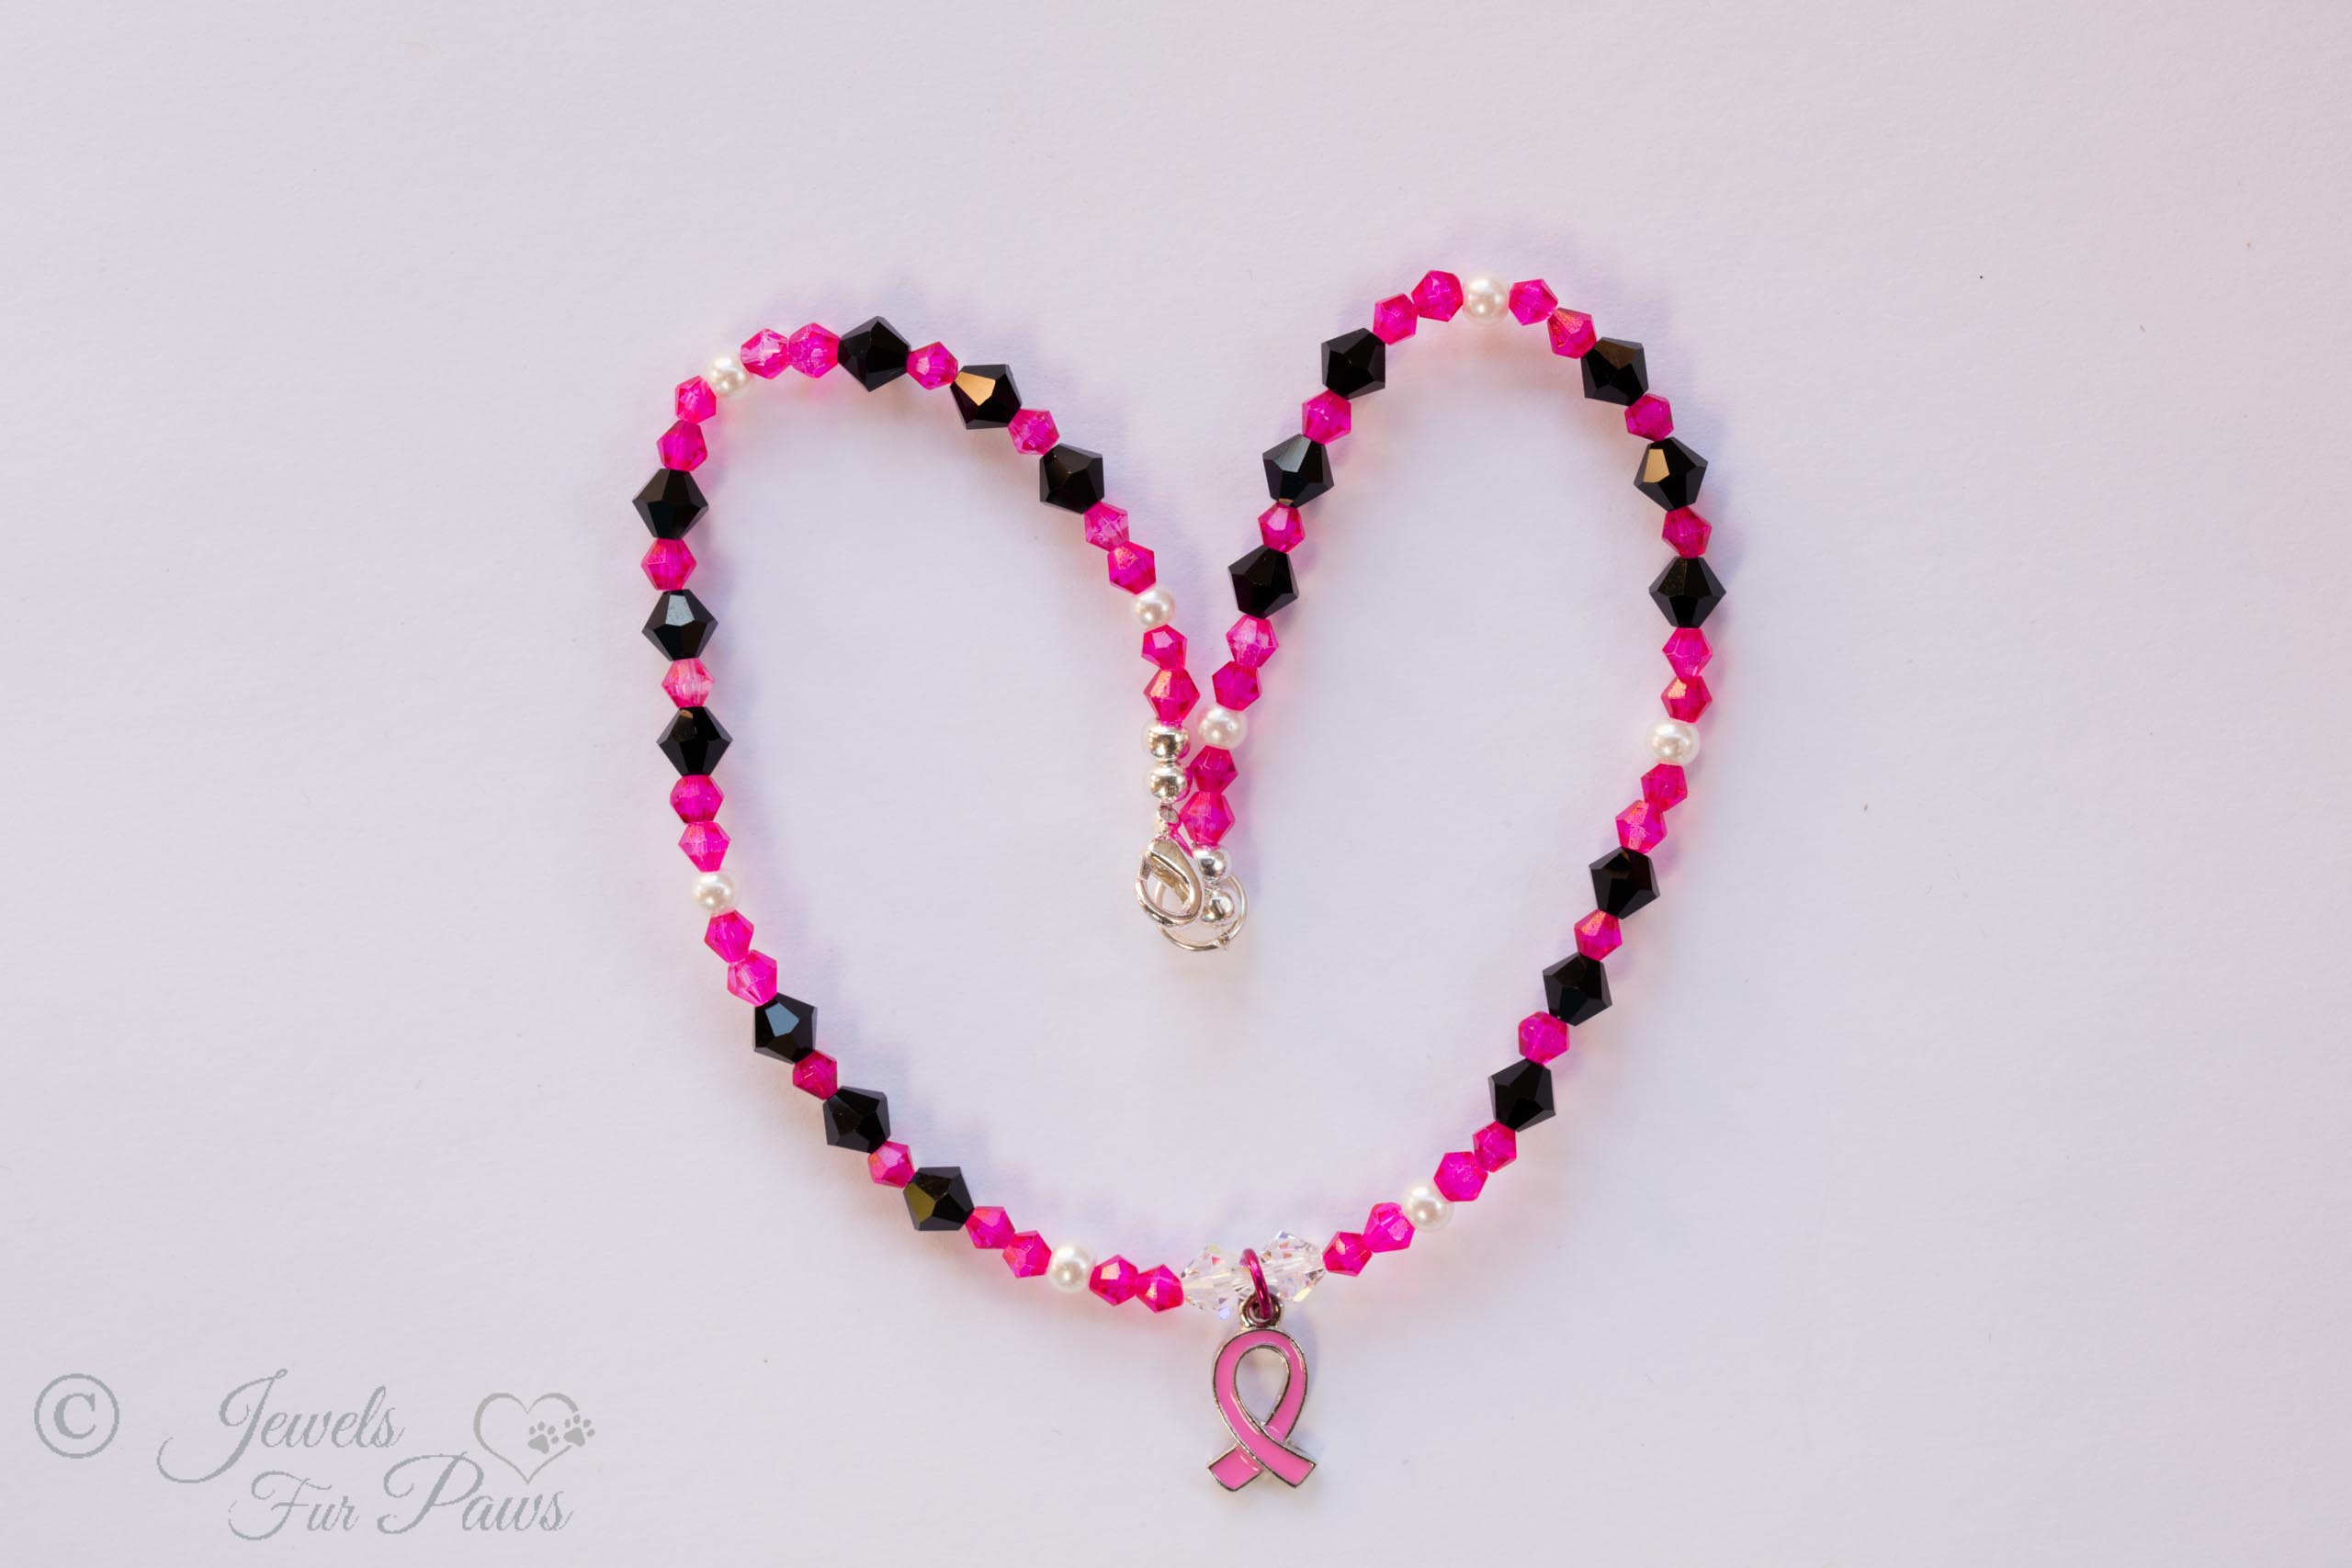 cat dog pet necklace breast cancer awareness hot pink and black crystals with hanging breast cancer ribbon pendant charm on white background